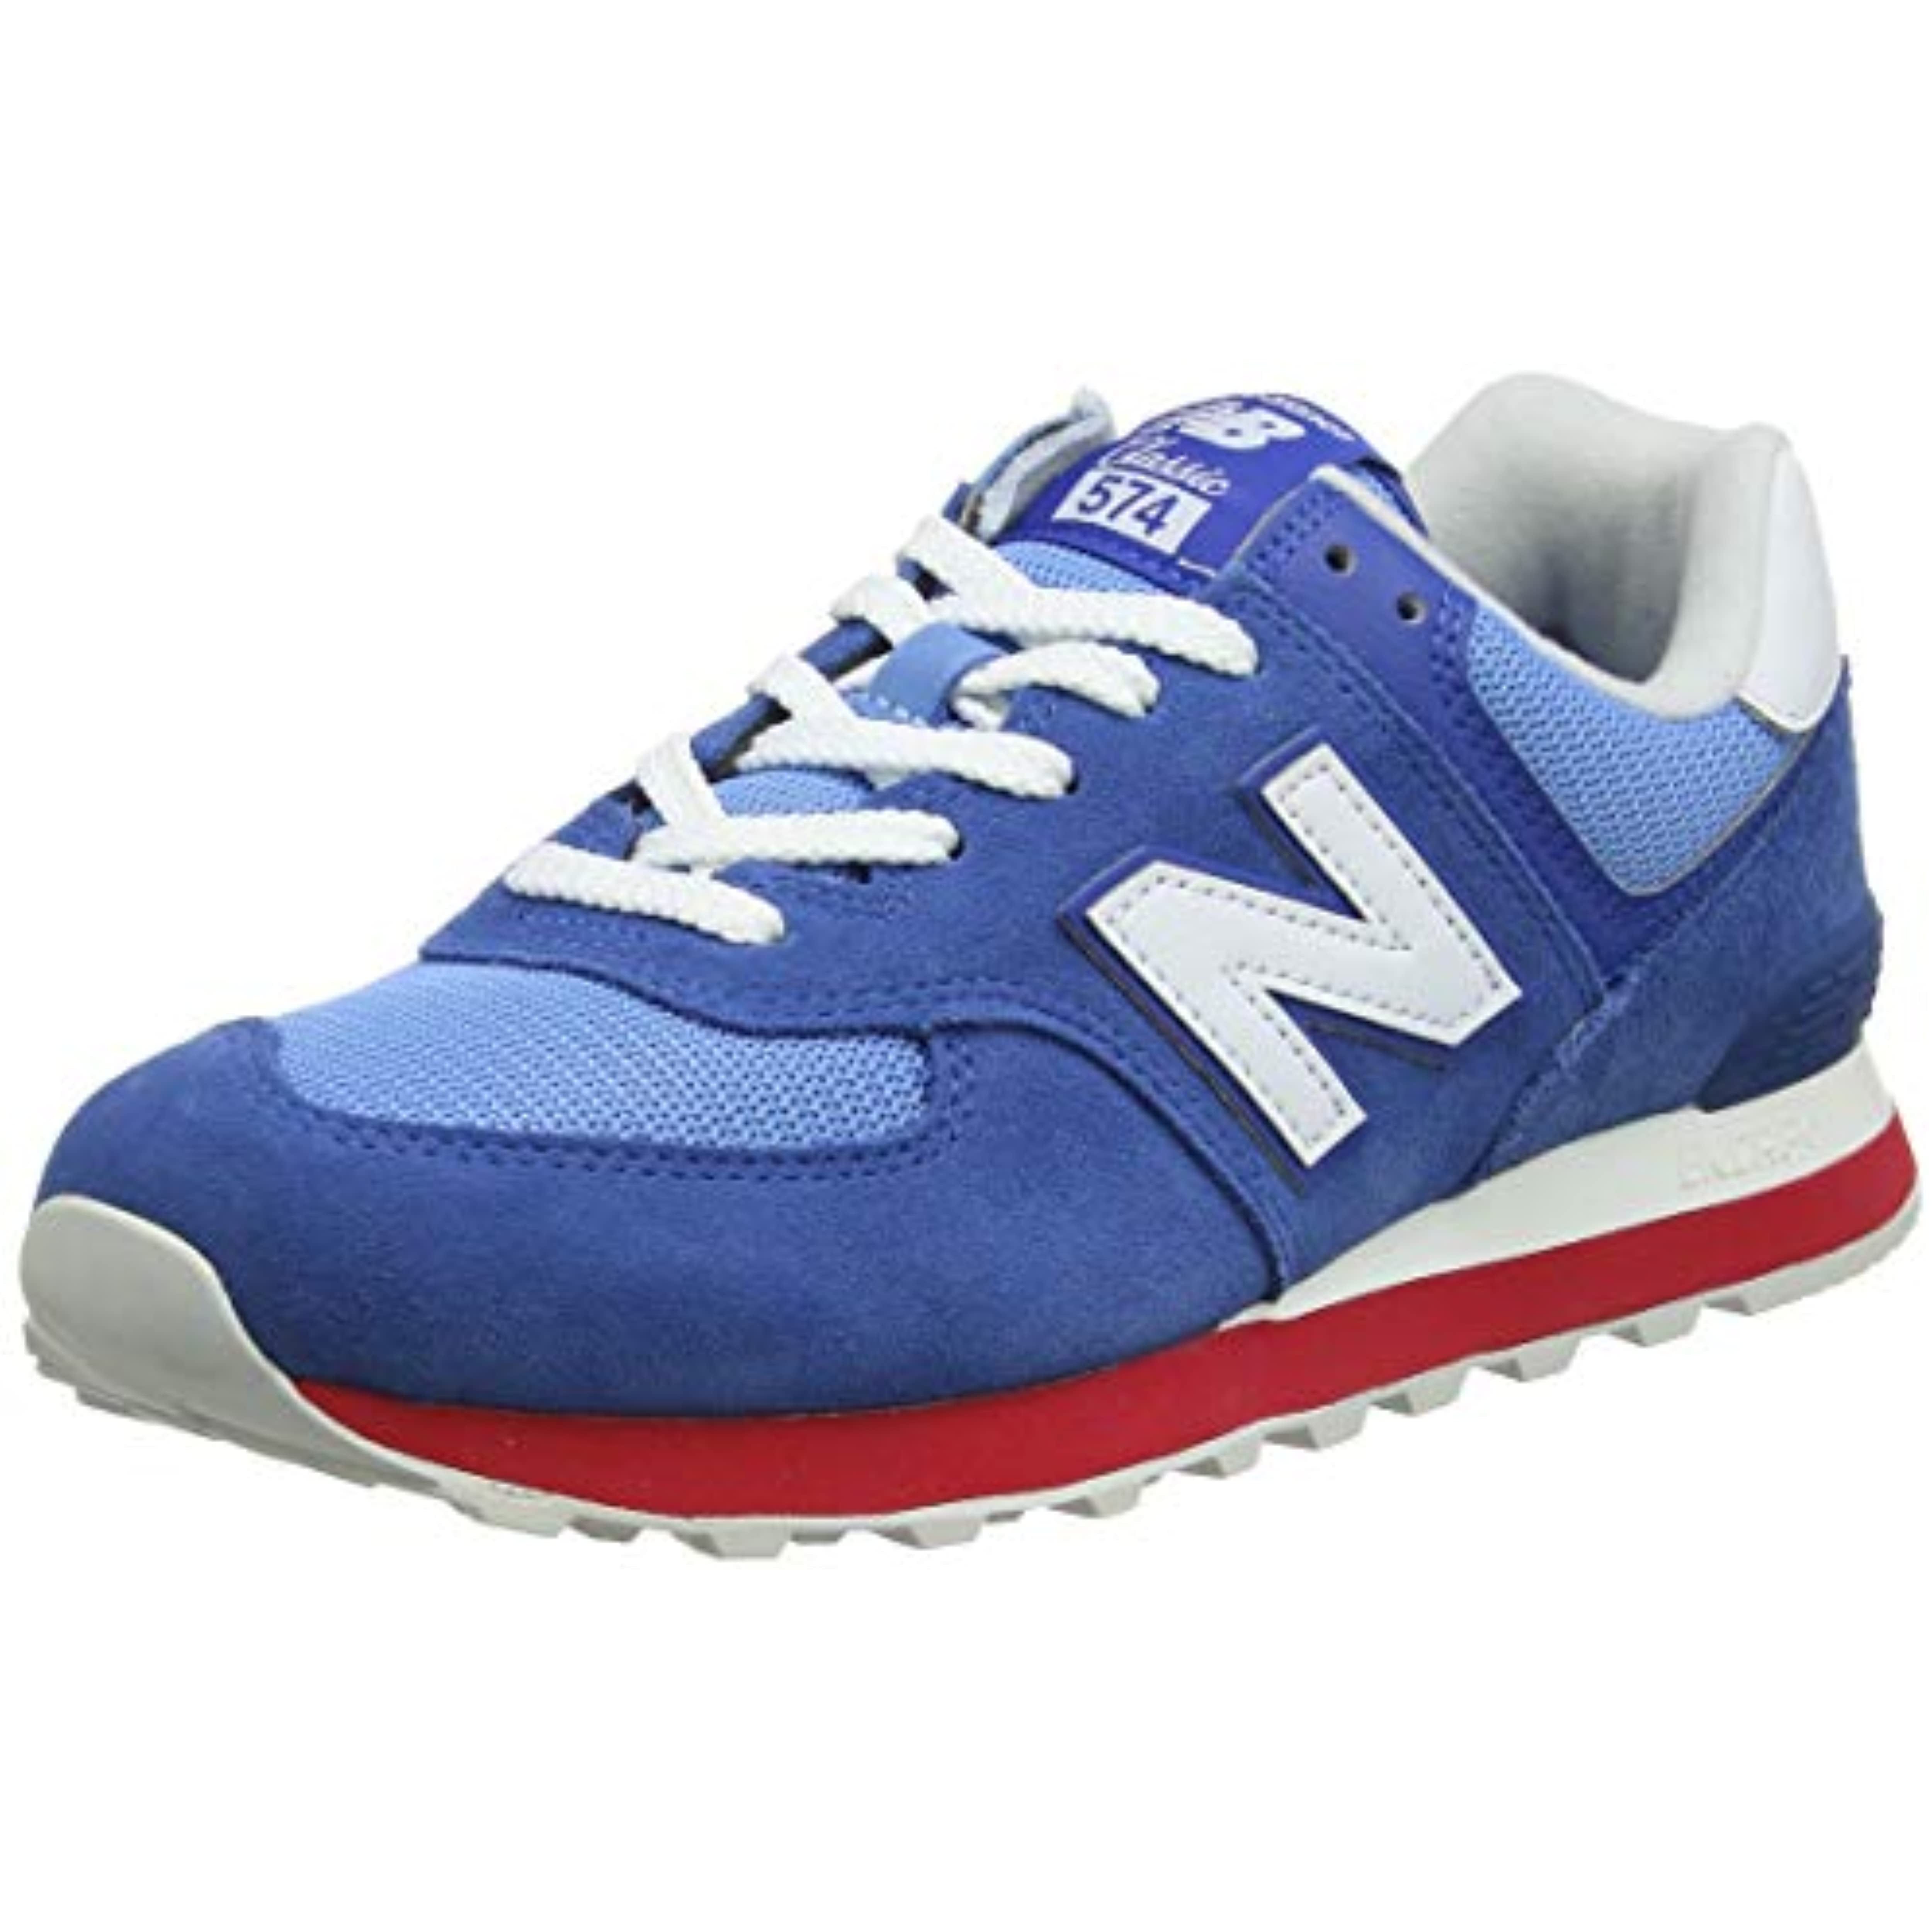 NEW BALANCE Iconic V2 Sneakers Blue / Red Walmart.com